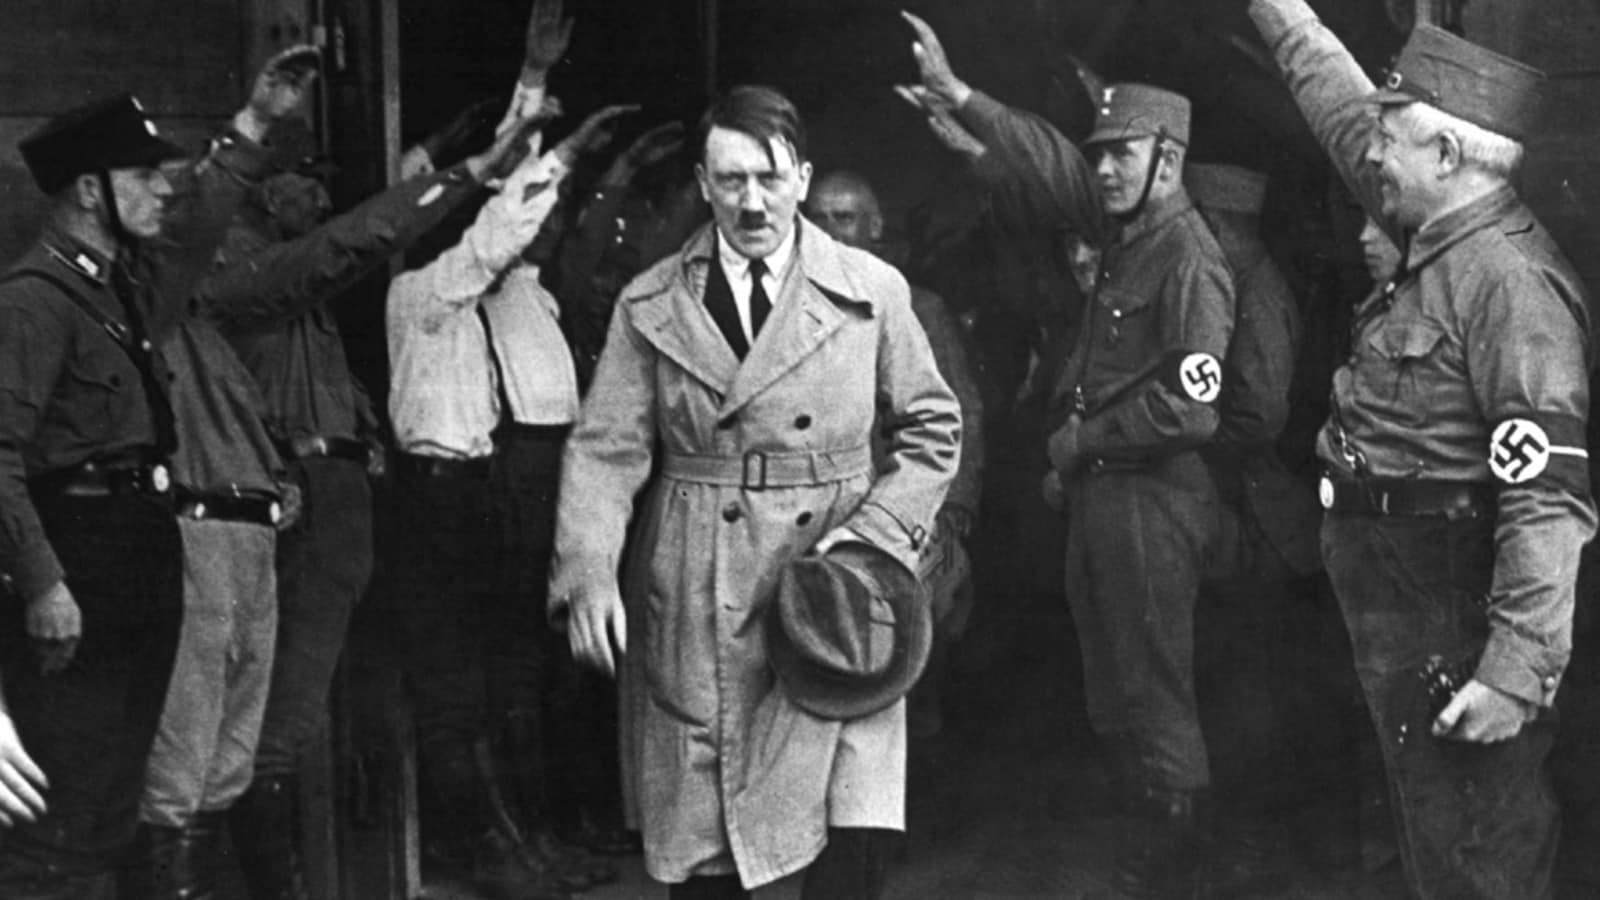 Hitler's 'Jewish' blood claims are an old conspiracy theory